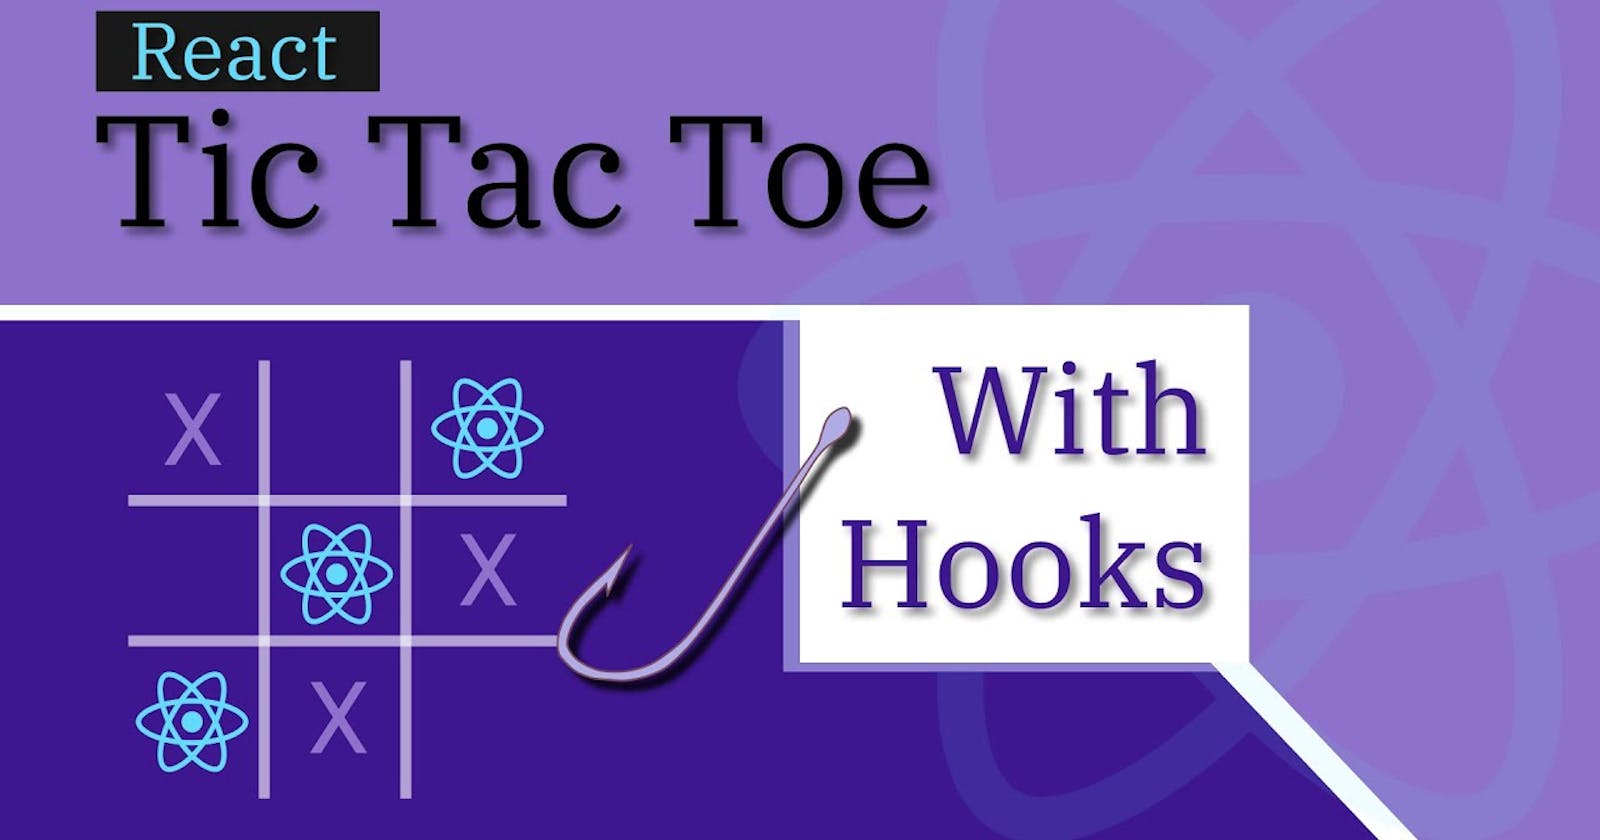 Understanding Props, Hooks, useState, useEffect by Building Tic-Tac-Toe.